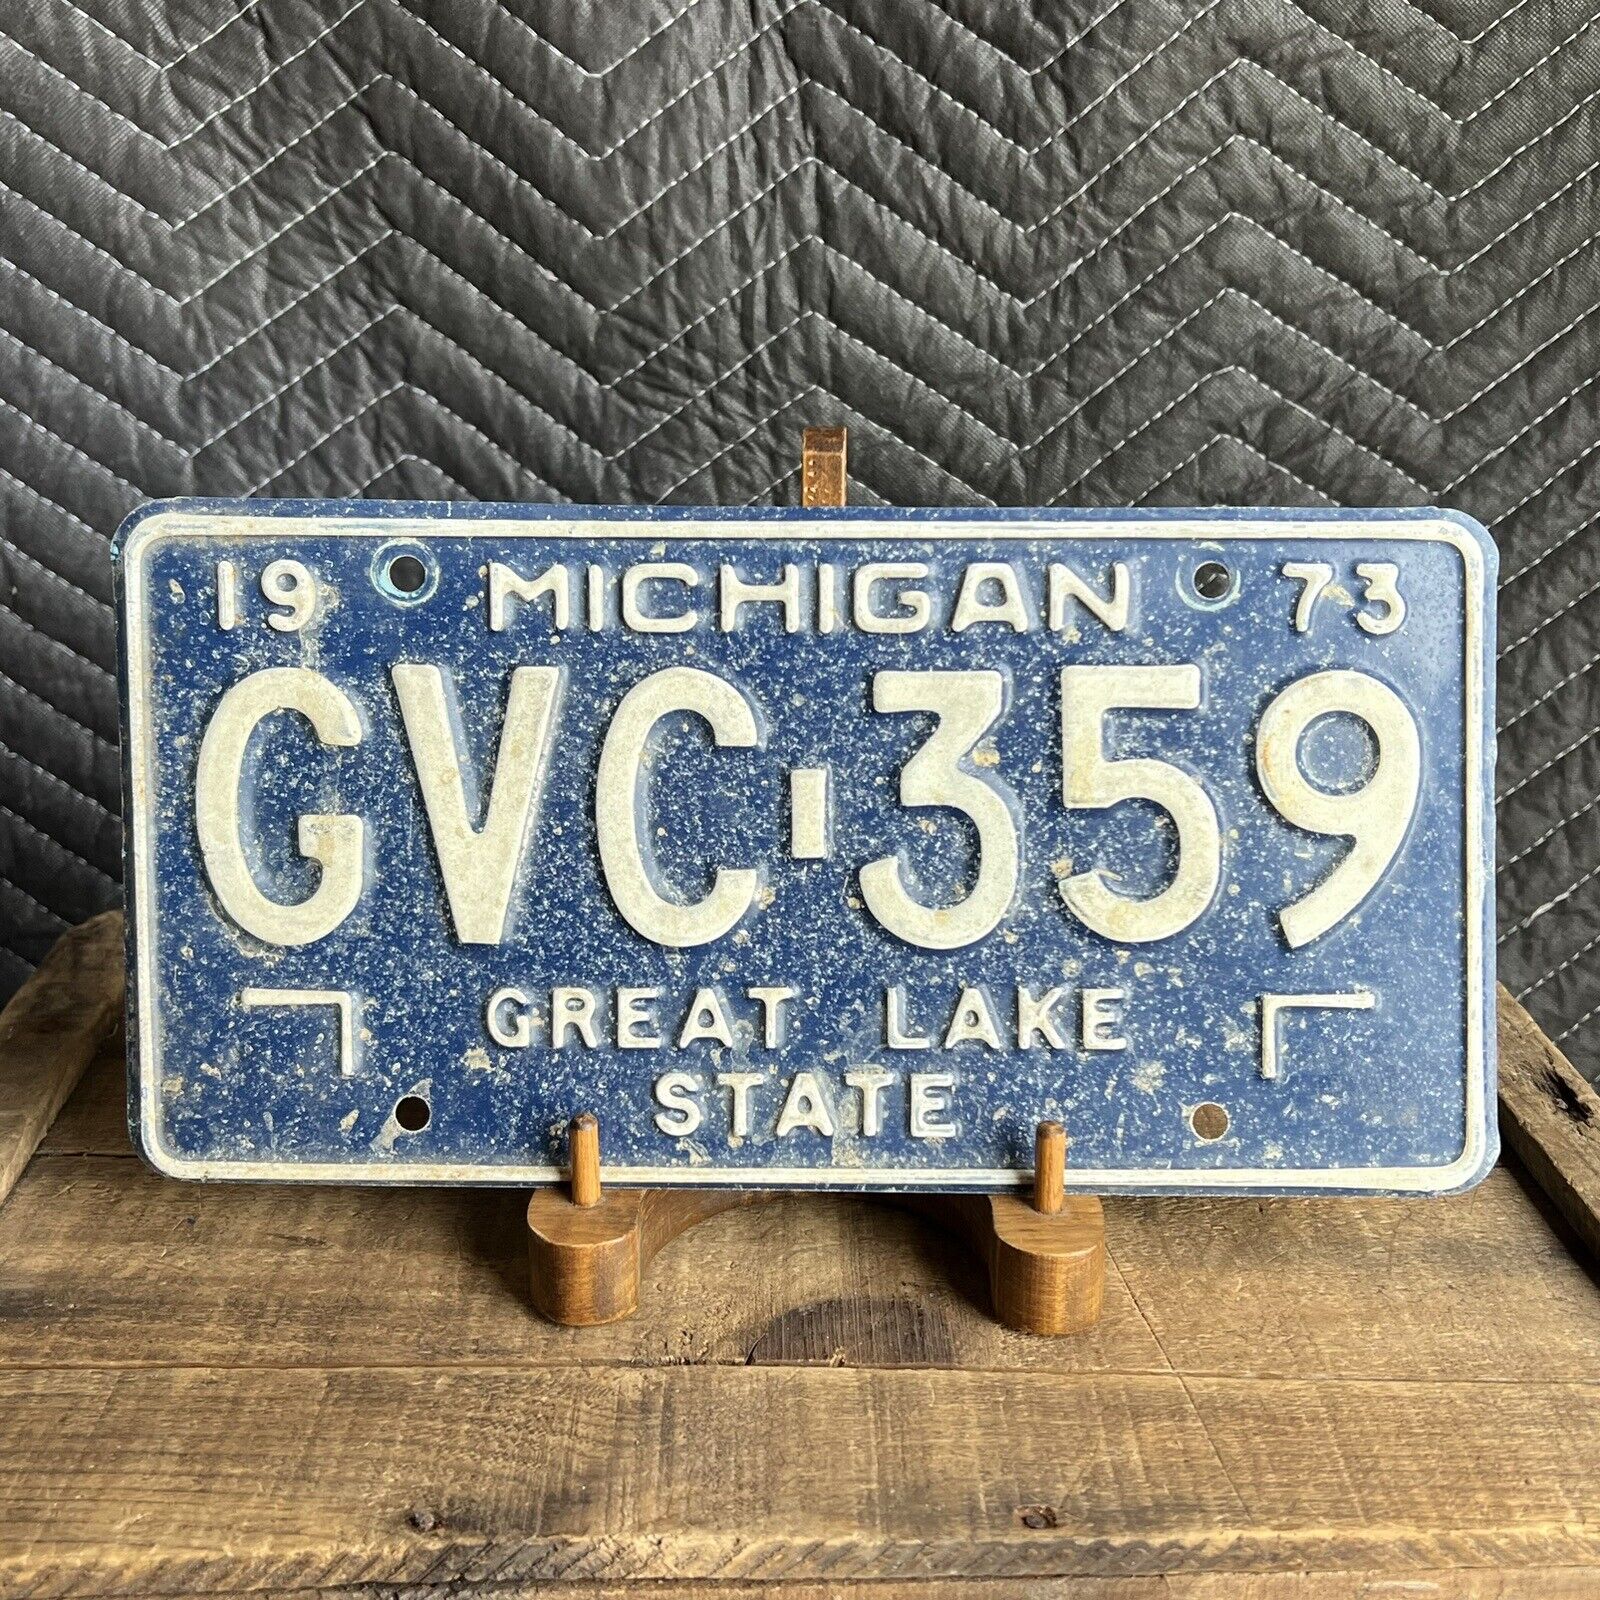 Vintage 1973 Michigan Great Lake State License Plate Gas Oil Classic Car GVC 359